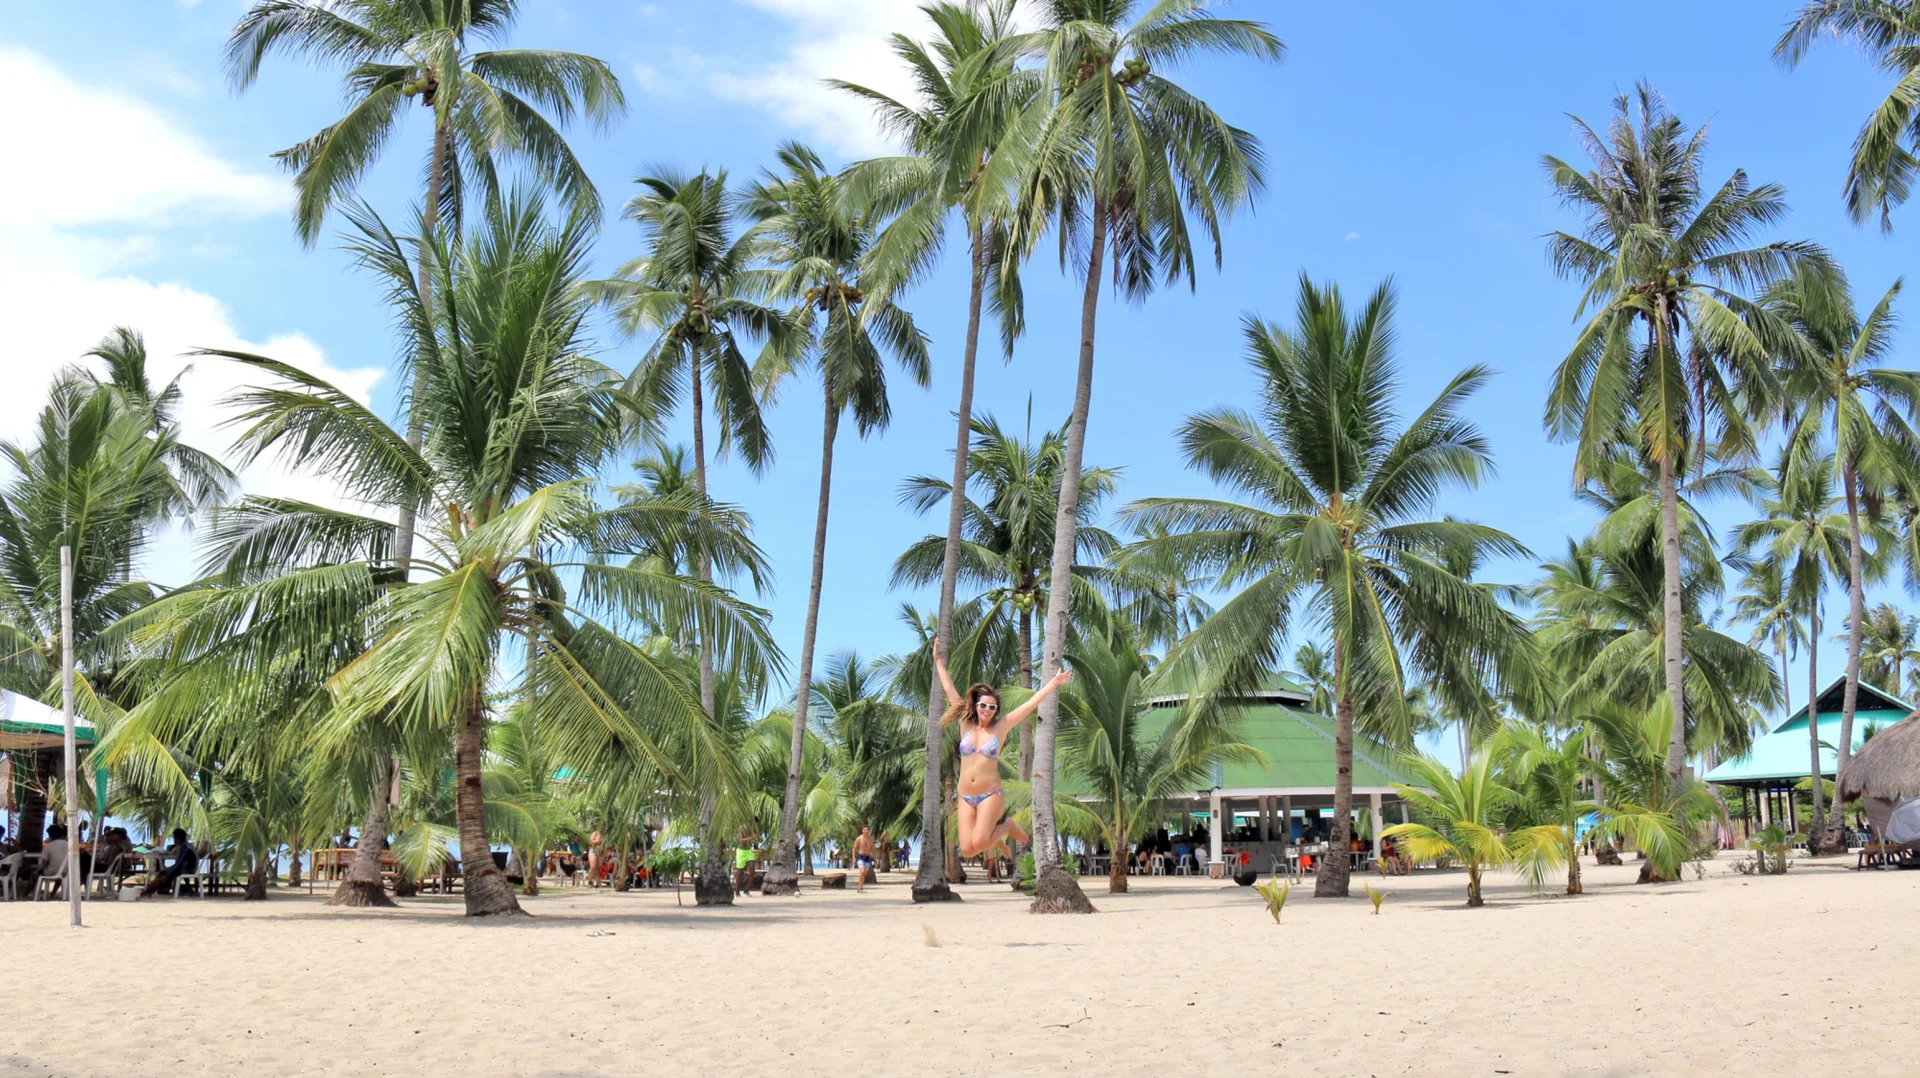 Deanna jumping on the sand on Cowrie island surrounded by tall palm trees